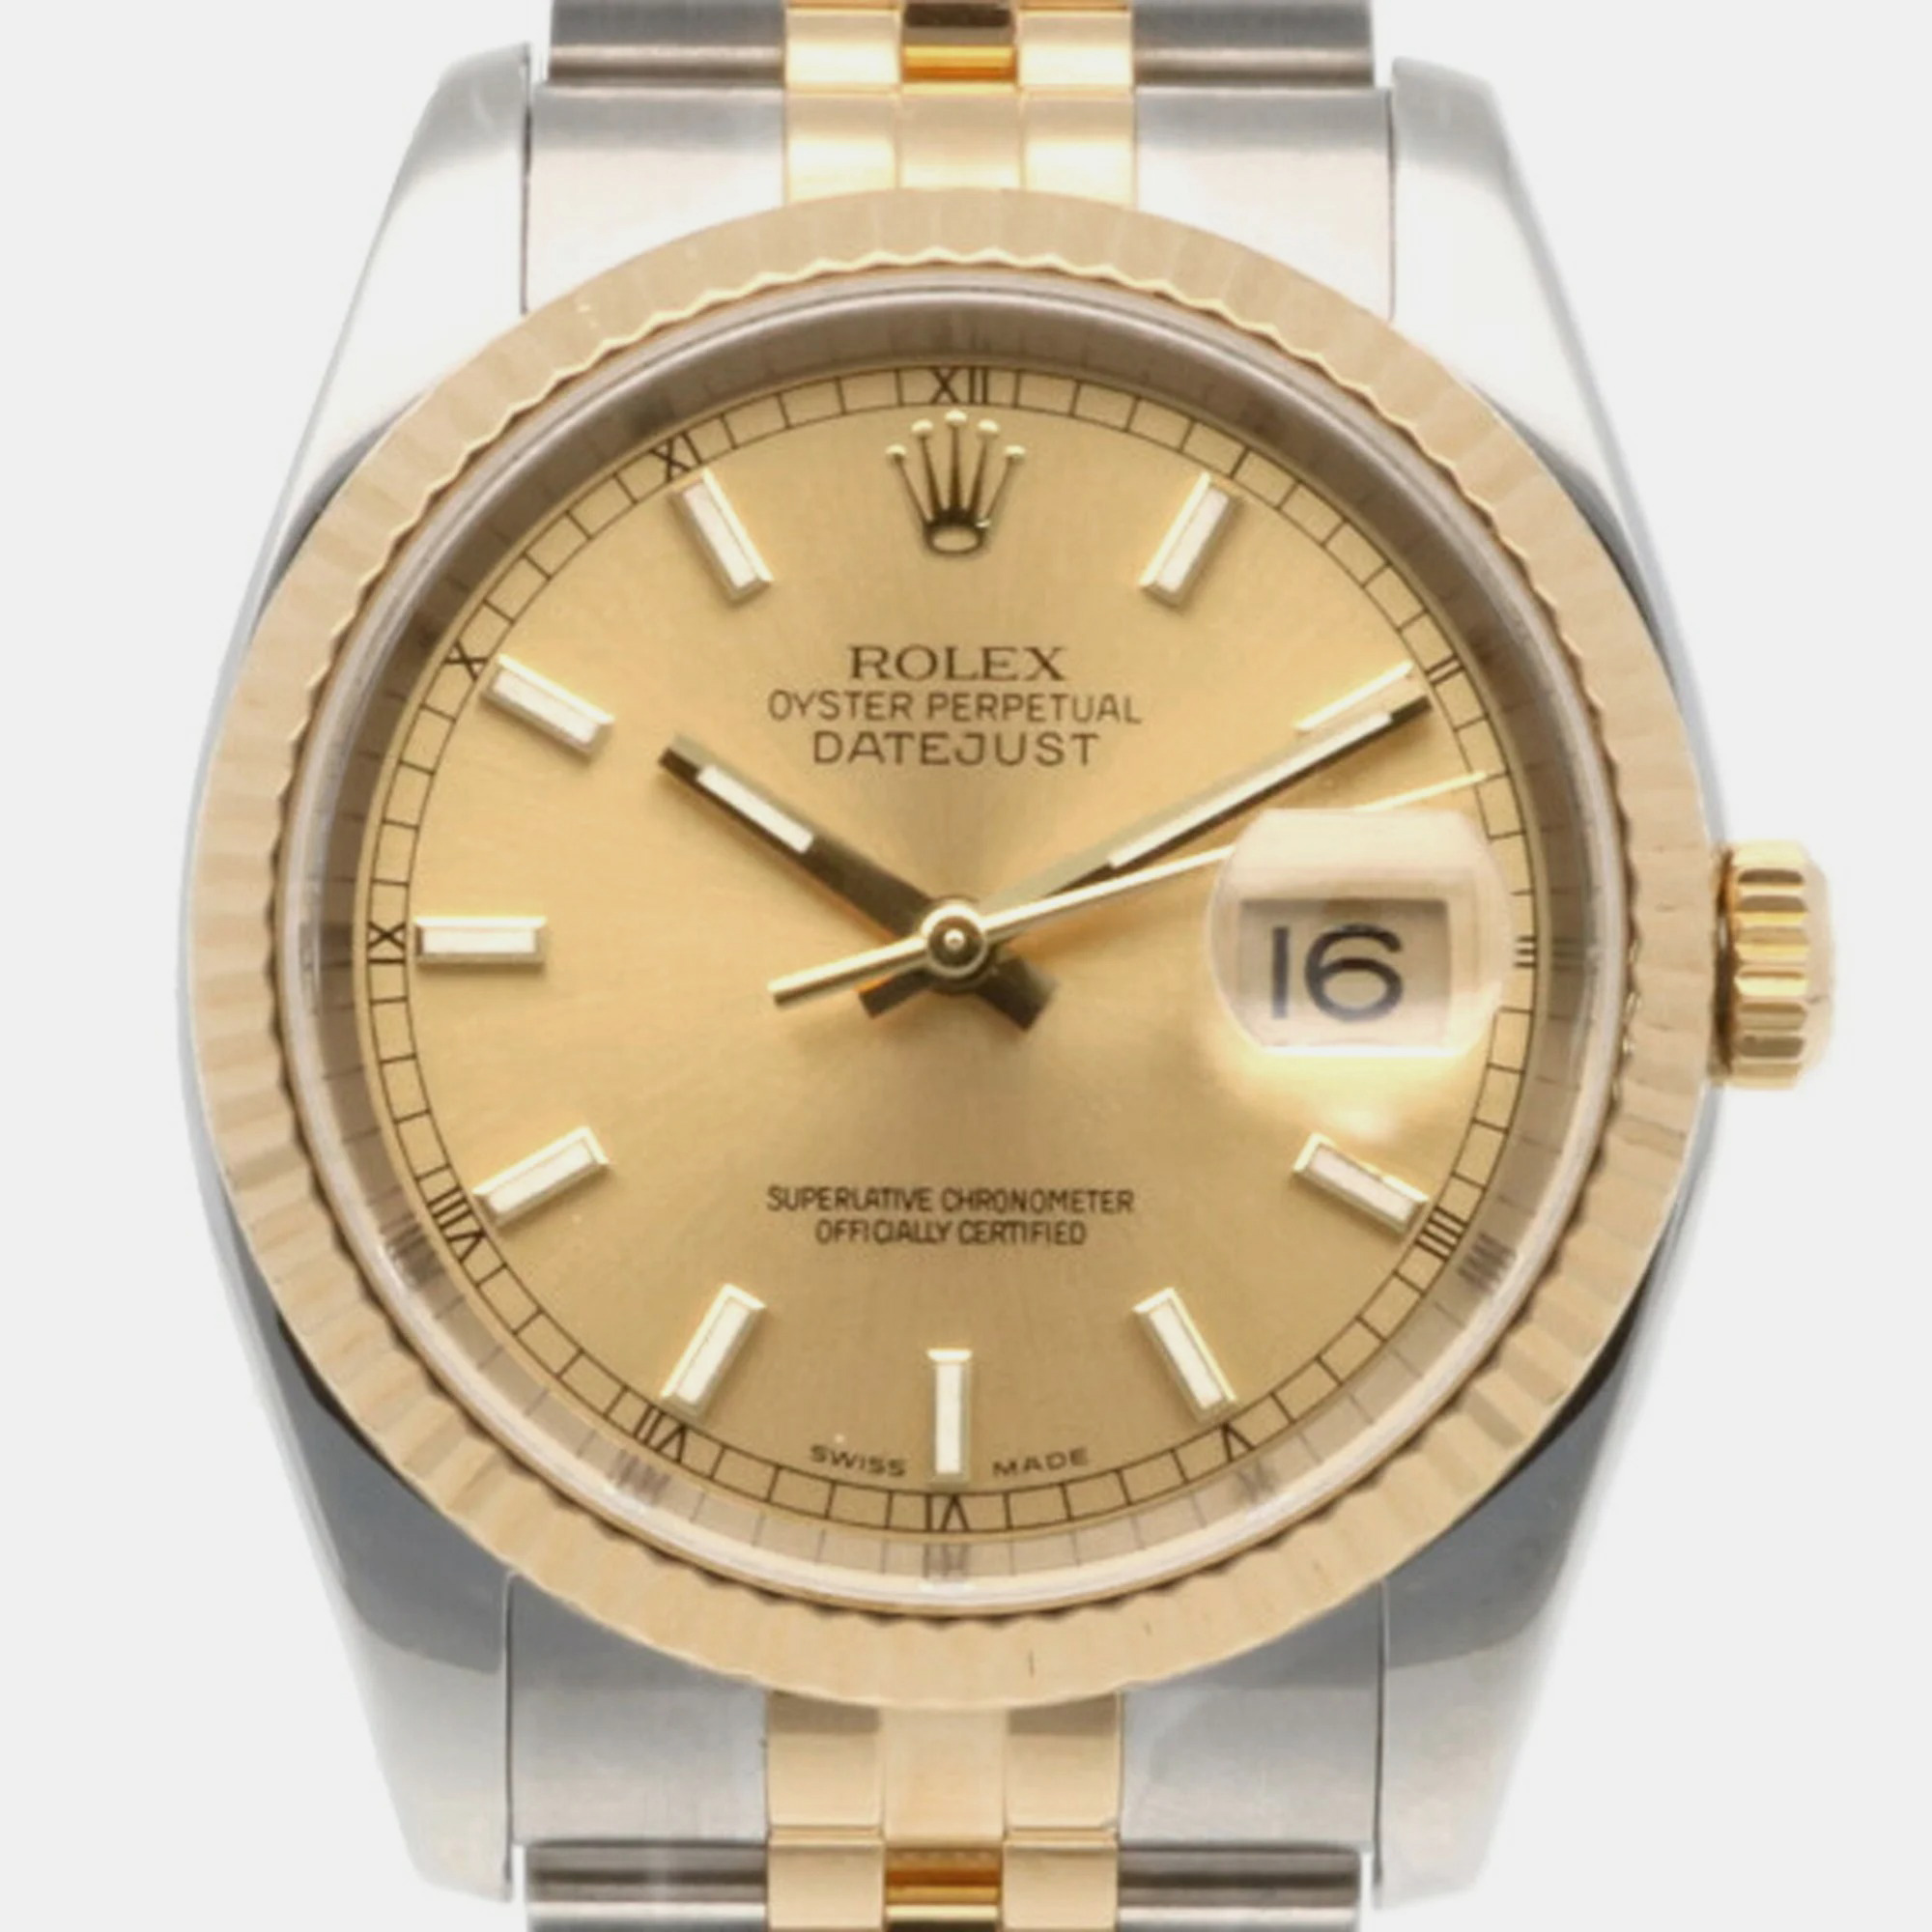 Rolex Champagne 18k Yellow Gold And Stainless Steel Datejust 116233 Automatic Men's Wristwatch 36 Mm